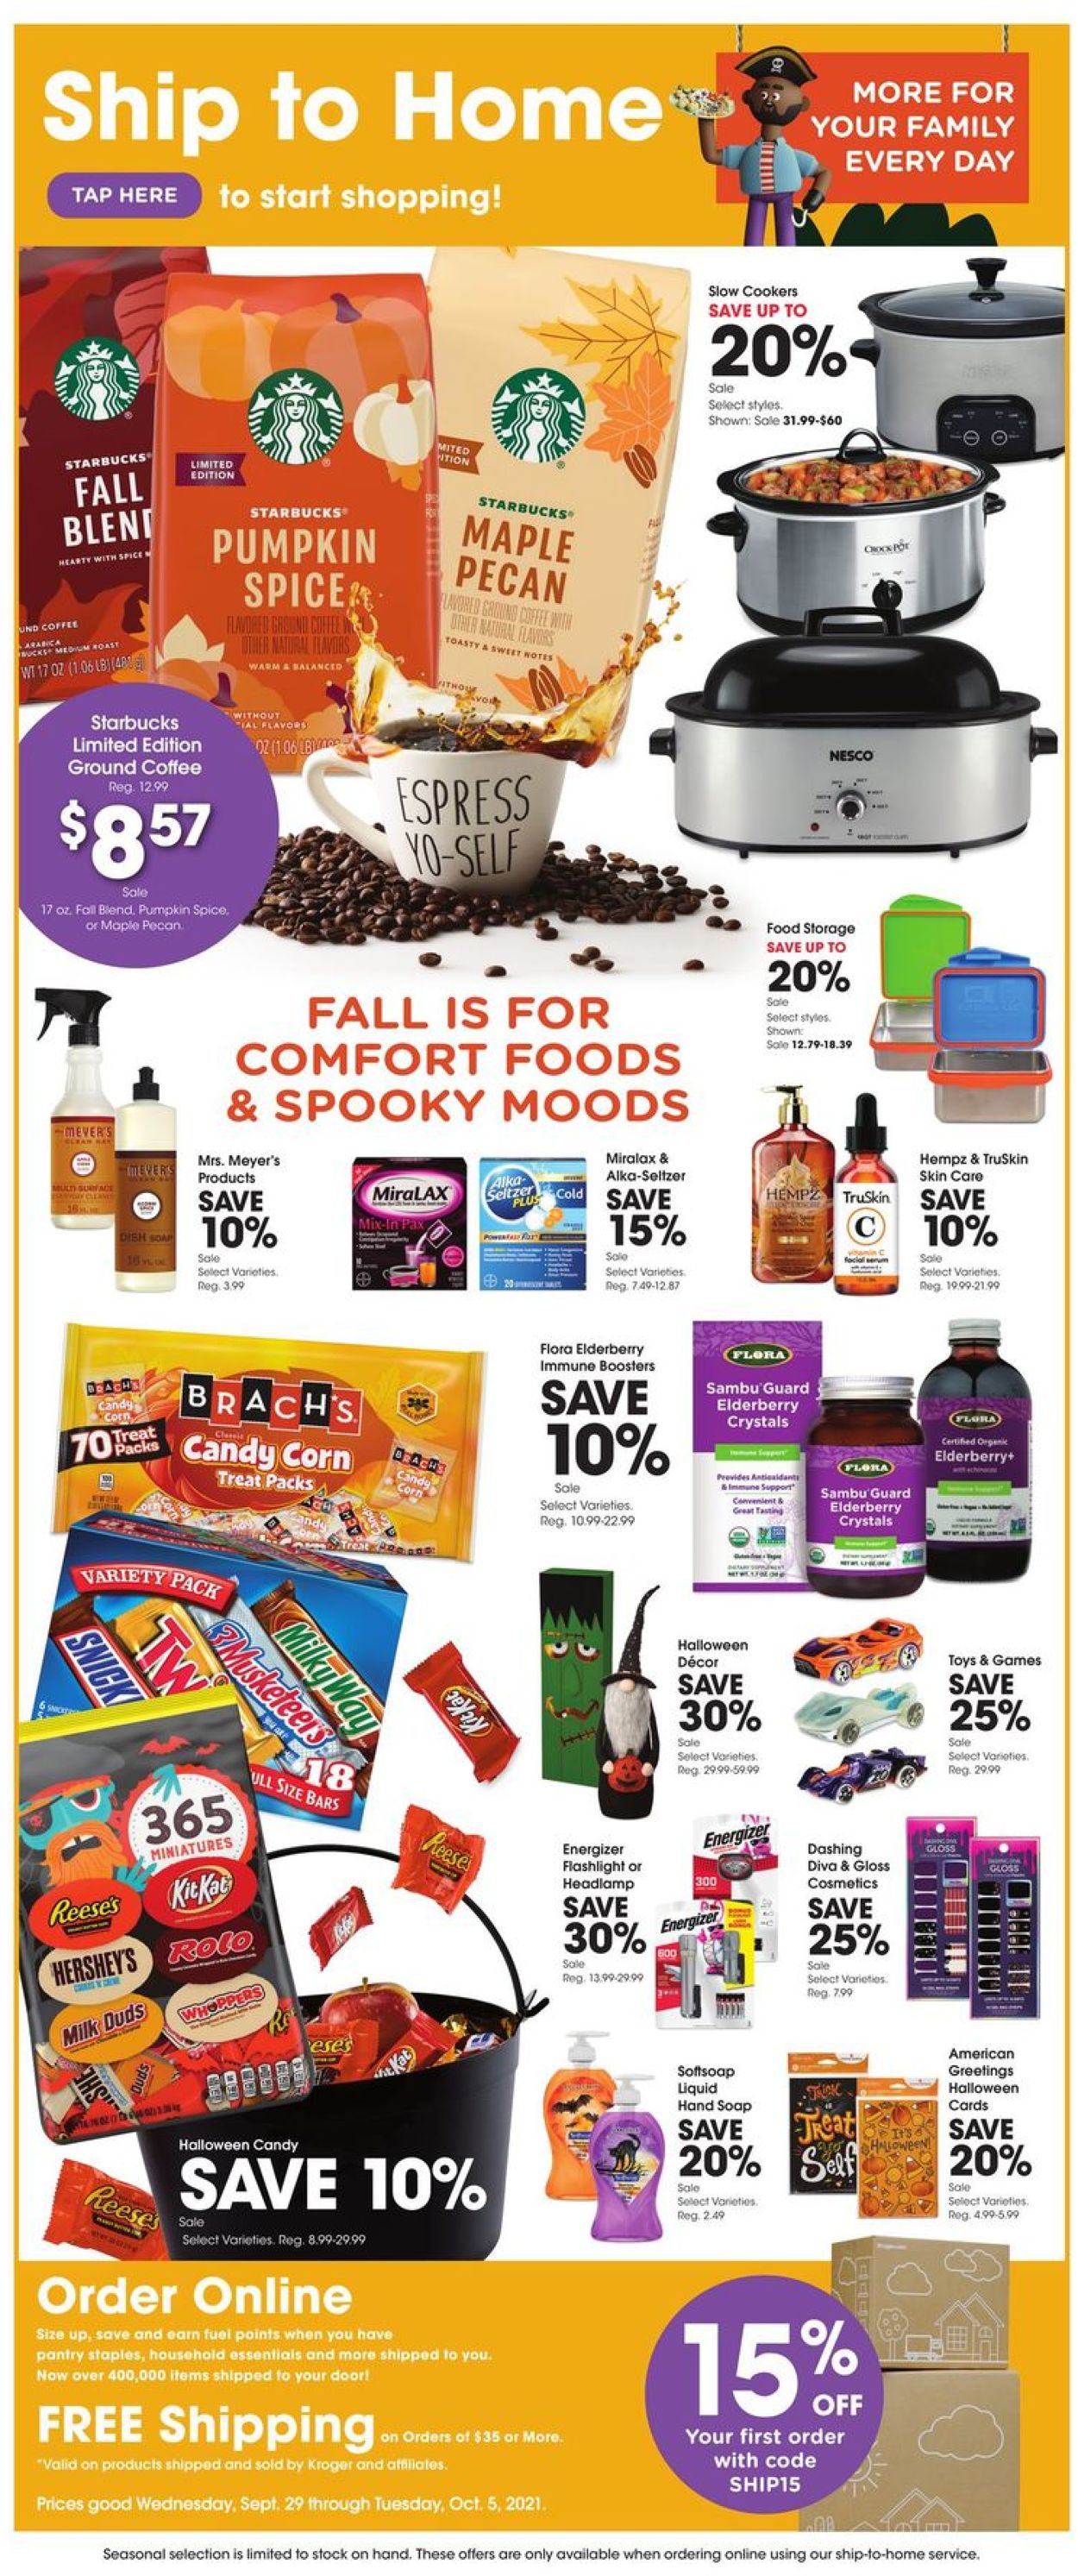 Fred Meyer Weekly Ad Circular - valid 09/29-10/05/2021 (Page 12)